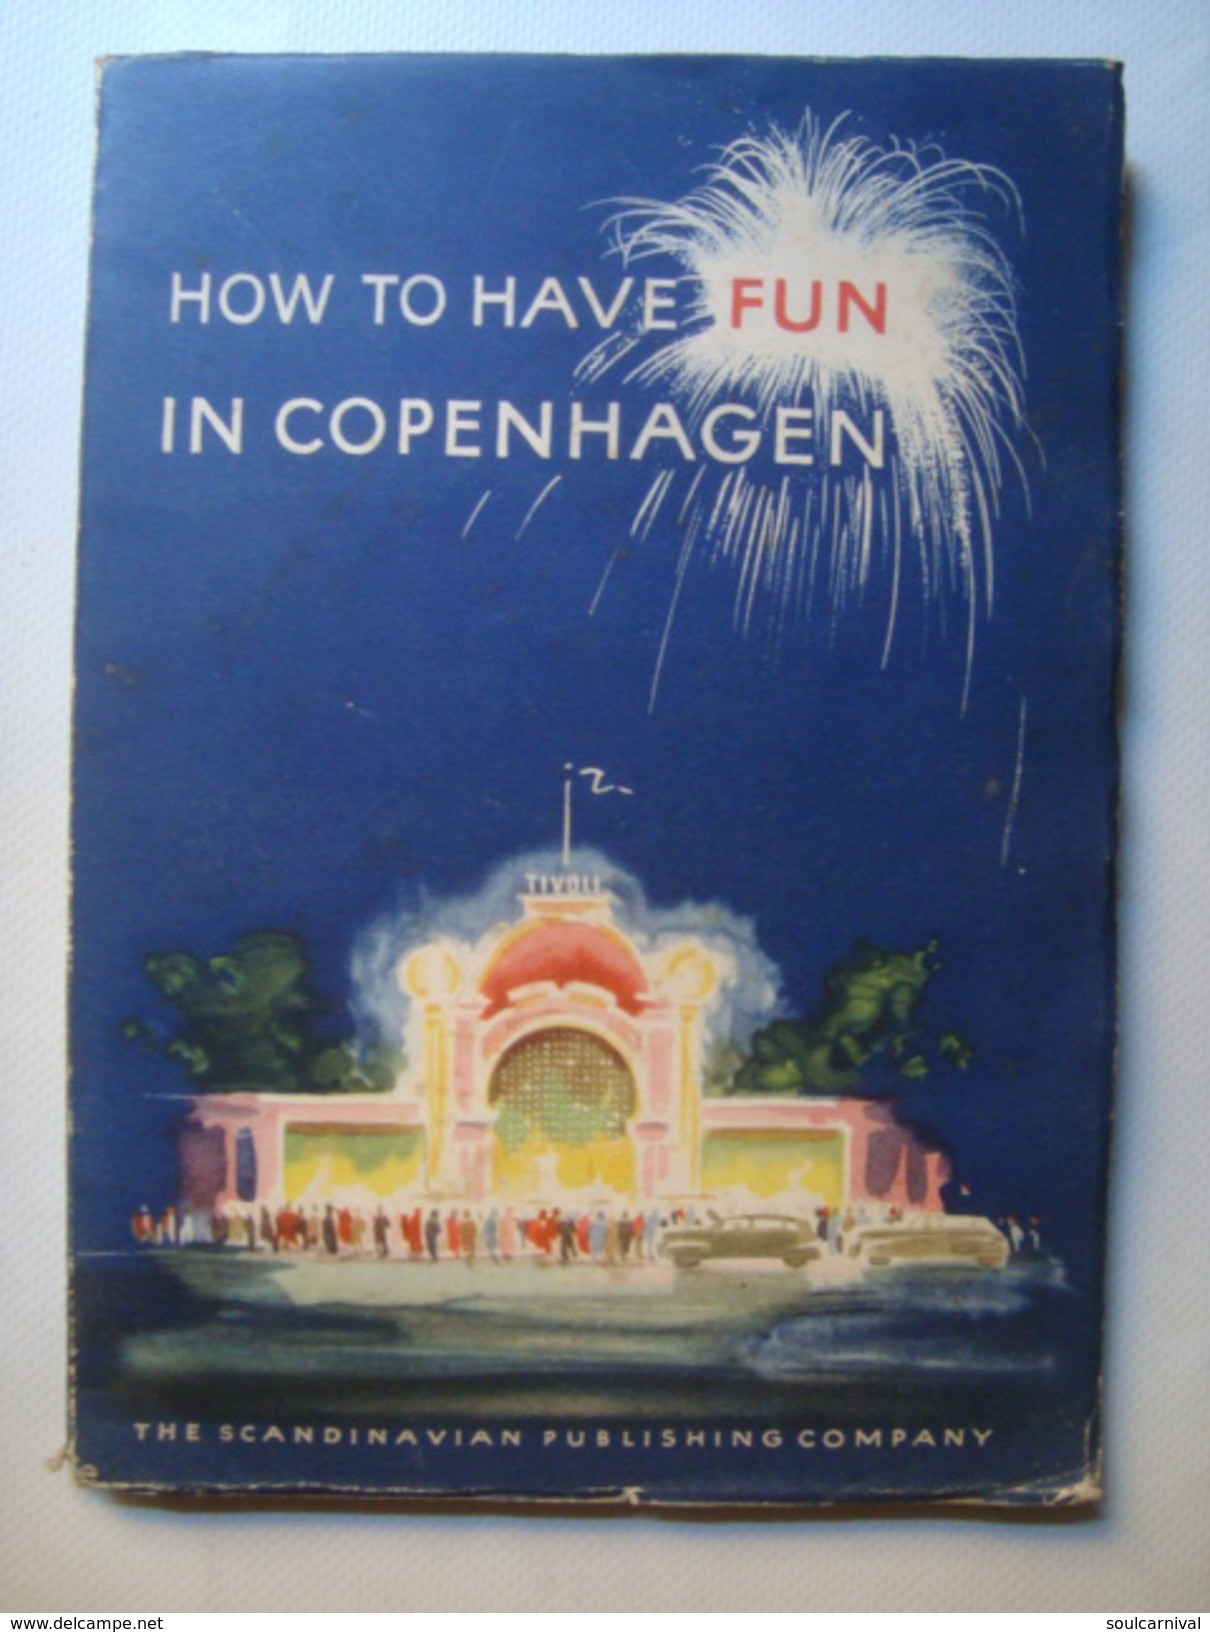 KRIS WINTHER - HOW TO HAVE FUN IN COPENHAGEN. AN INFORMAL GUIDE TO AMUSEMENTS IN THE CAPITAL OF DENMARK - 1950. - Europe